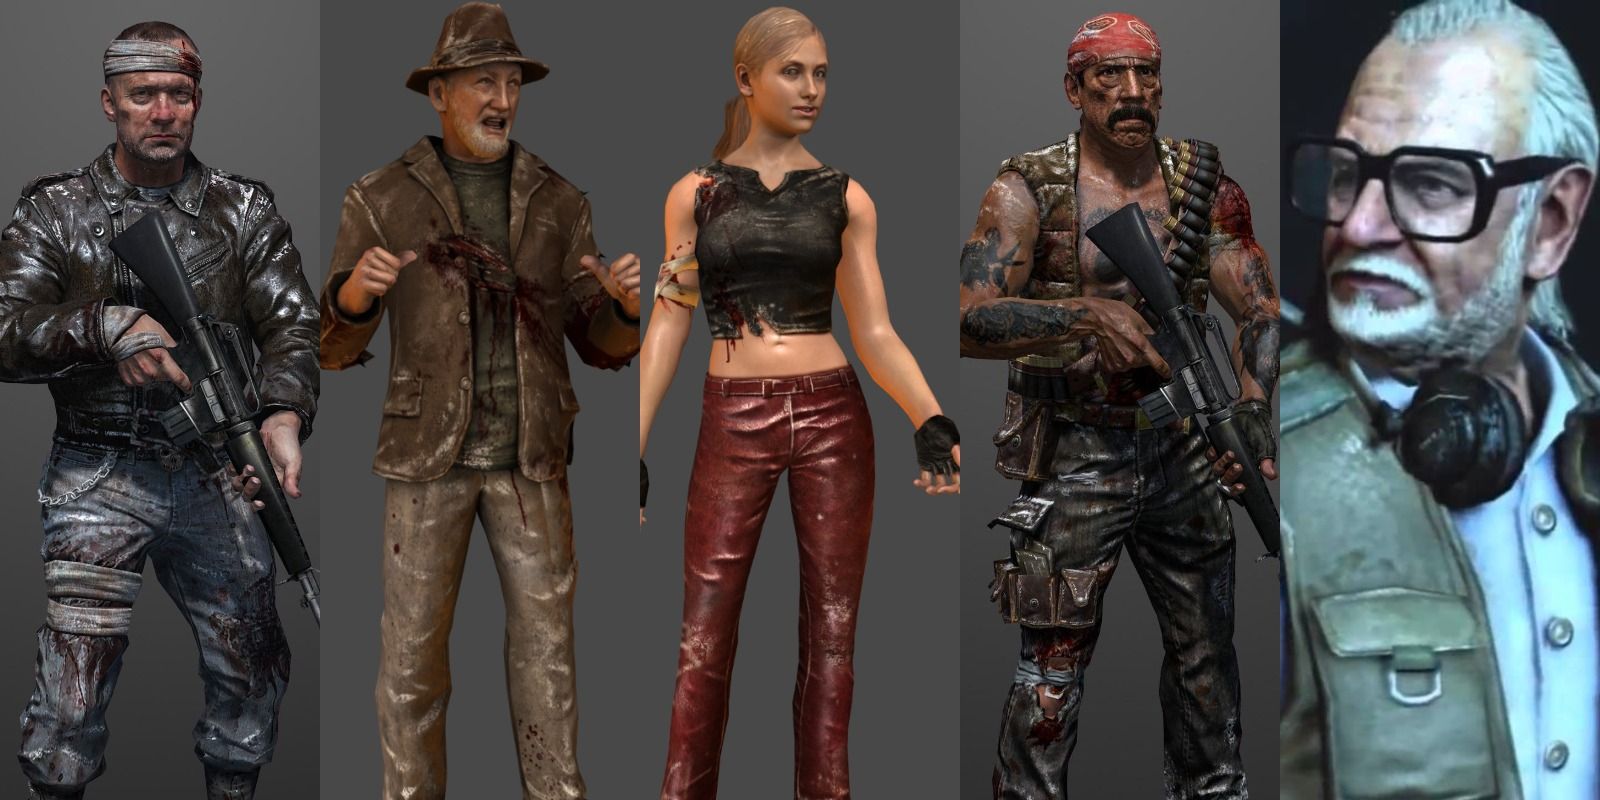 Michael Rooker, Sarah Michelle Gellar, Danny Trejo, Robert Englund, and George A Romero in Call Of Duty Black Ops' Call Of The Dead